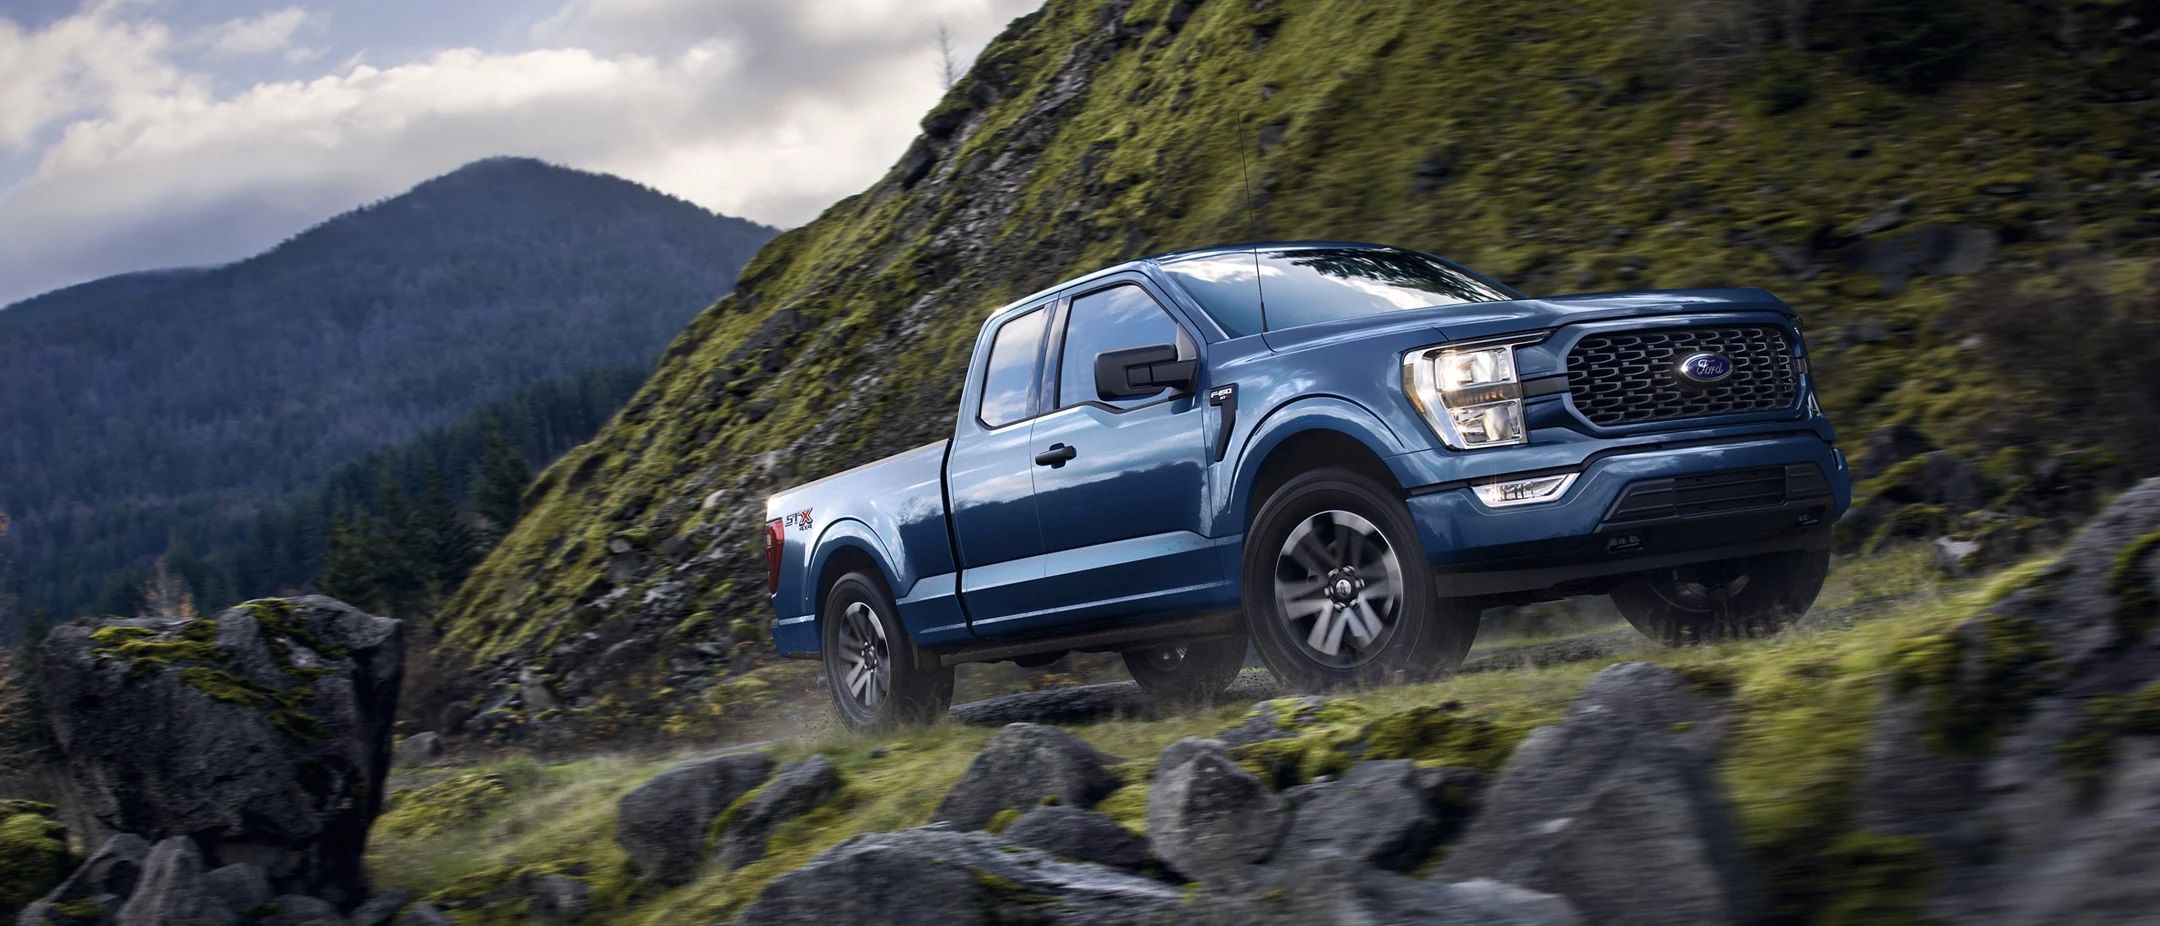 The 2023 Ford F-150 with a hybrid powertrain.